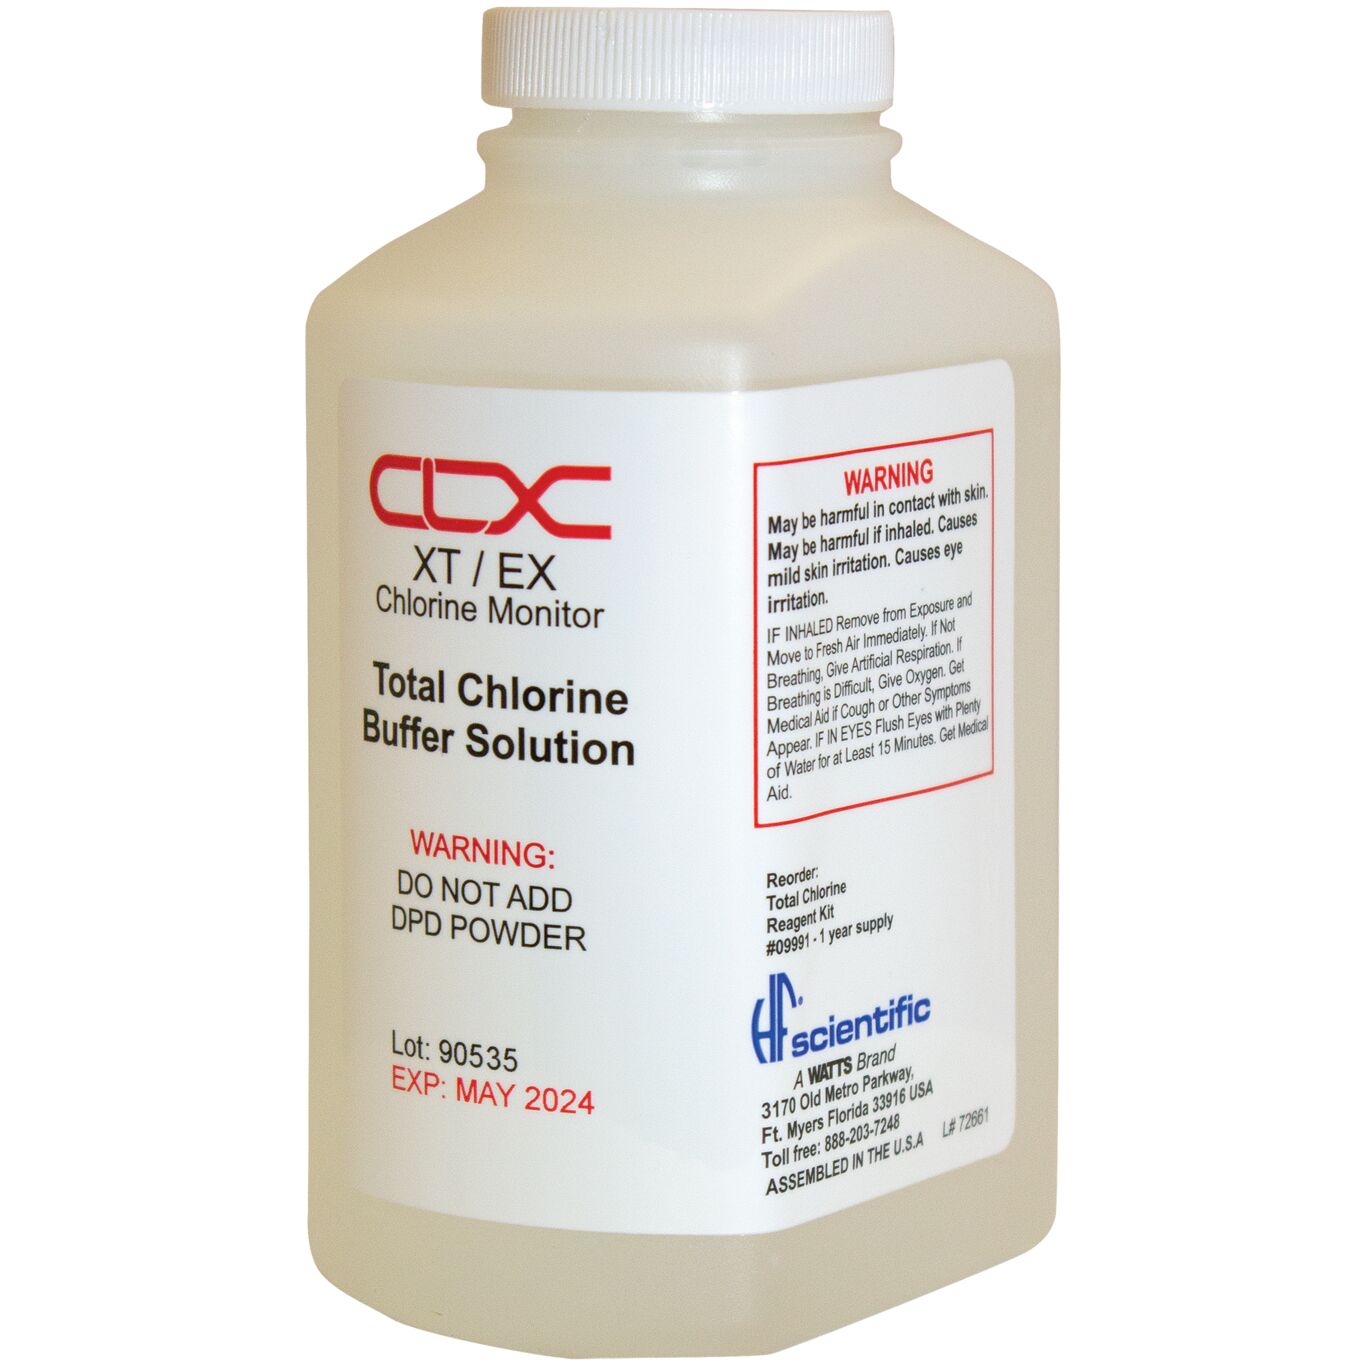 Product Image - Total Chlorine Reagent Kit for CLX-XT, CLX-Ex, and CLX-Ex2